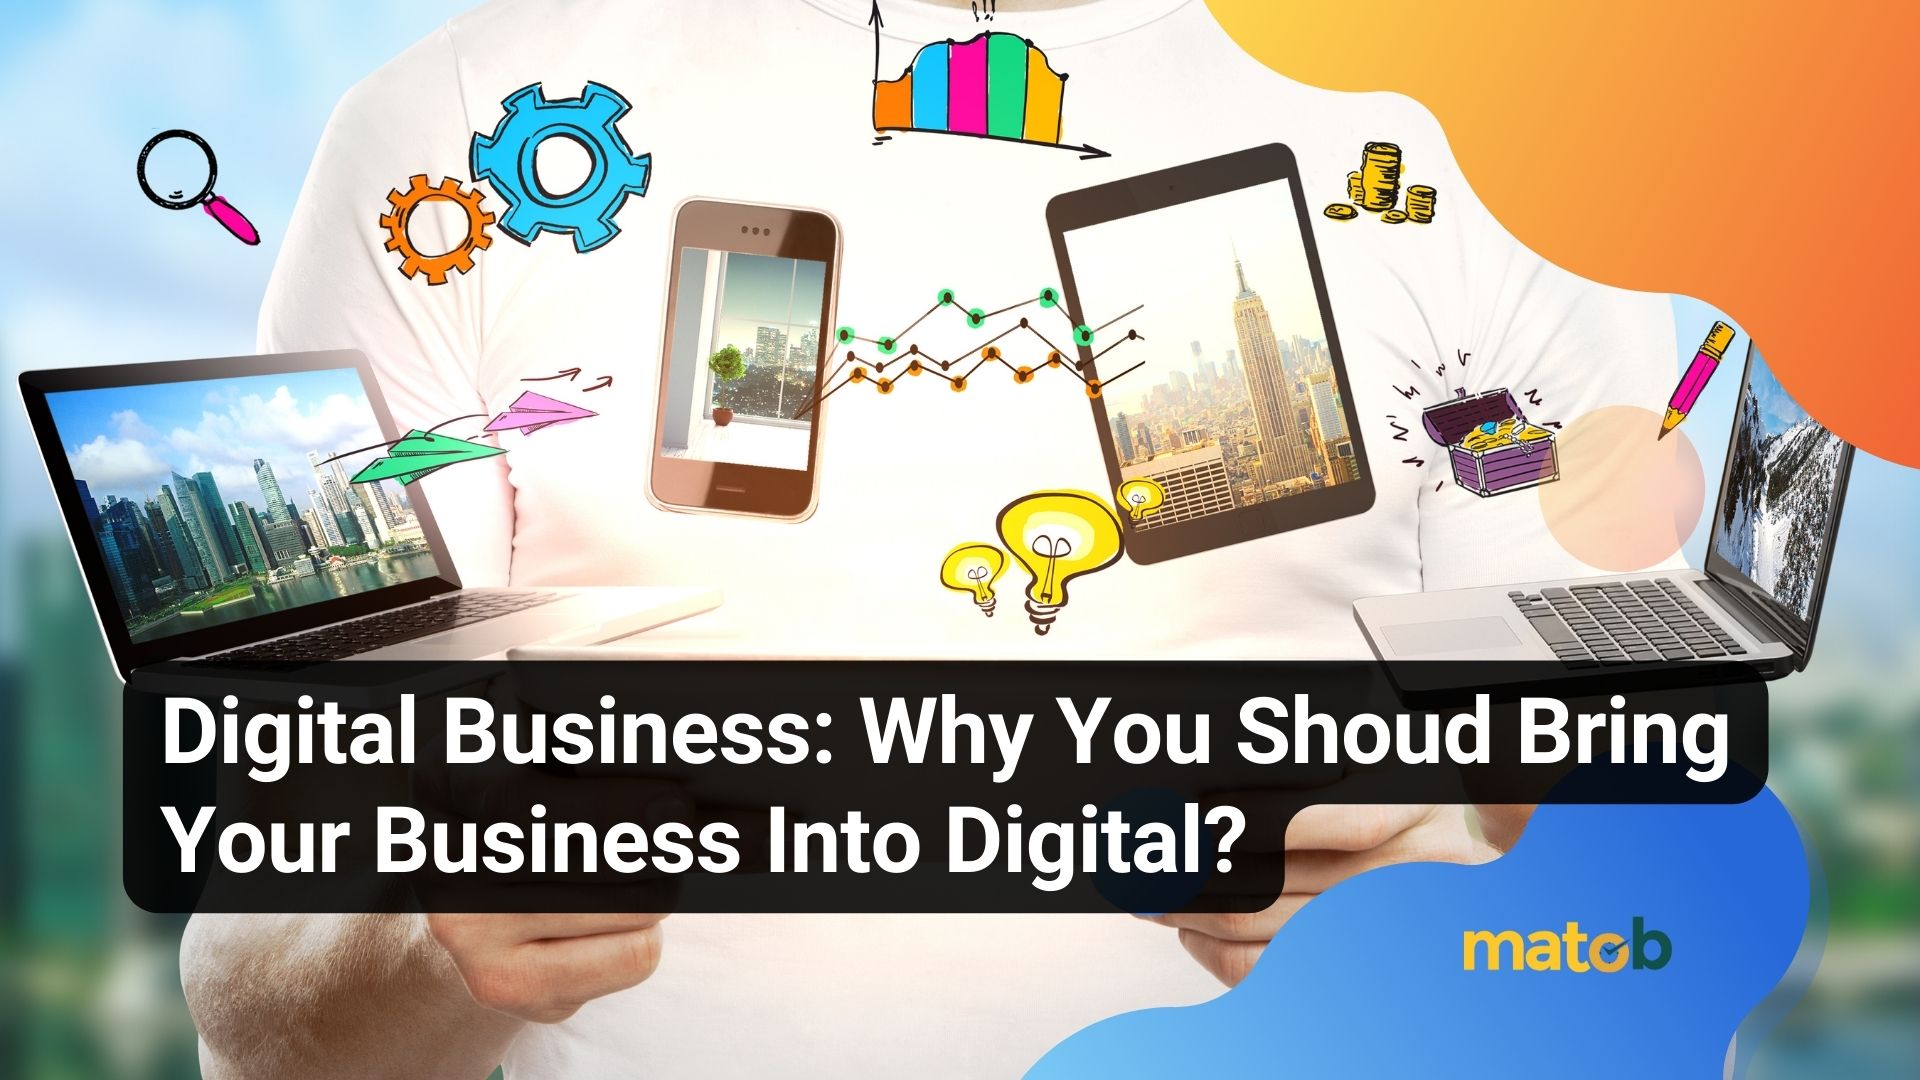 Digital Business: Why You Shoud Bring Your Business Into Digital?